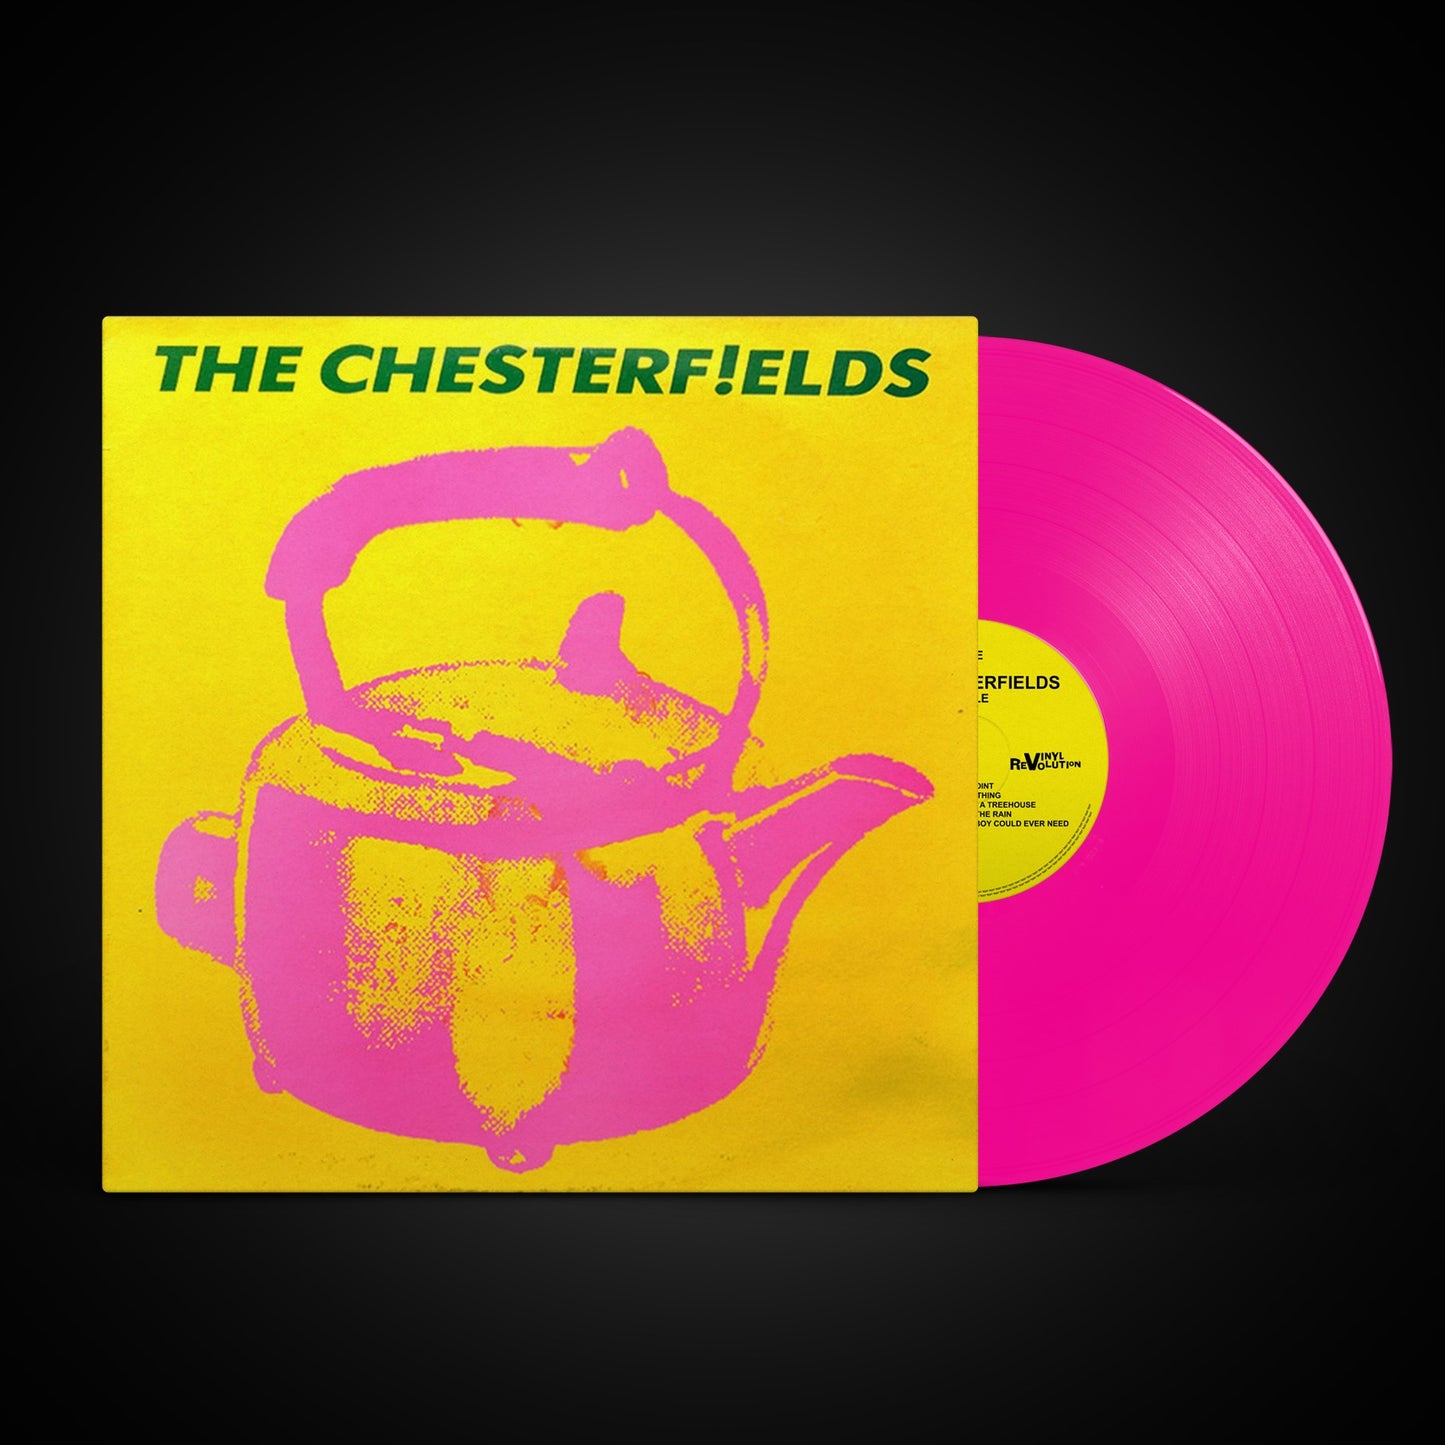 The Chesterfields - Kettle - 500 Hand Numbered Albums on Pink Eco-Friendly vinyl